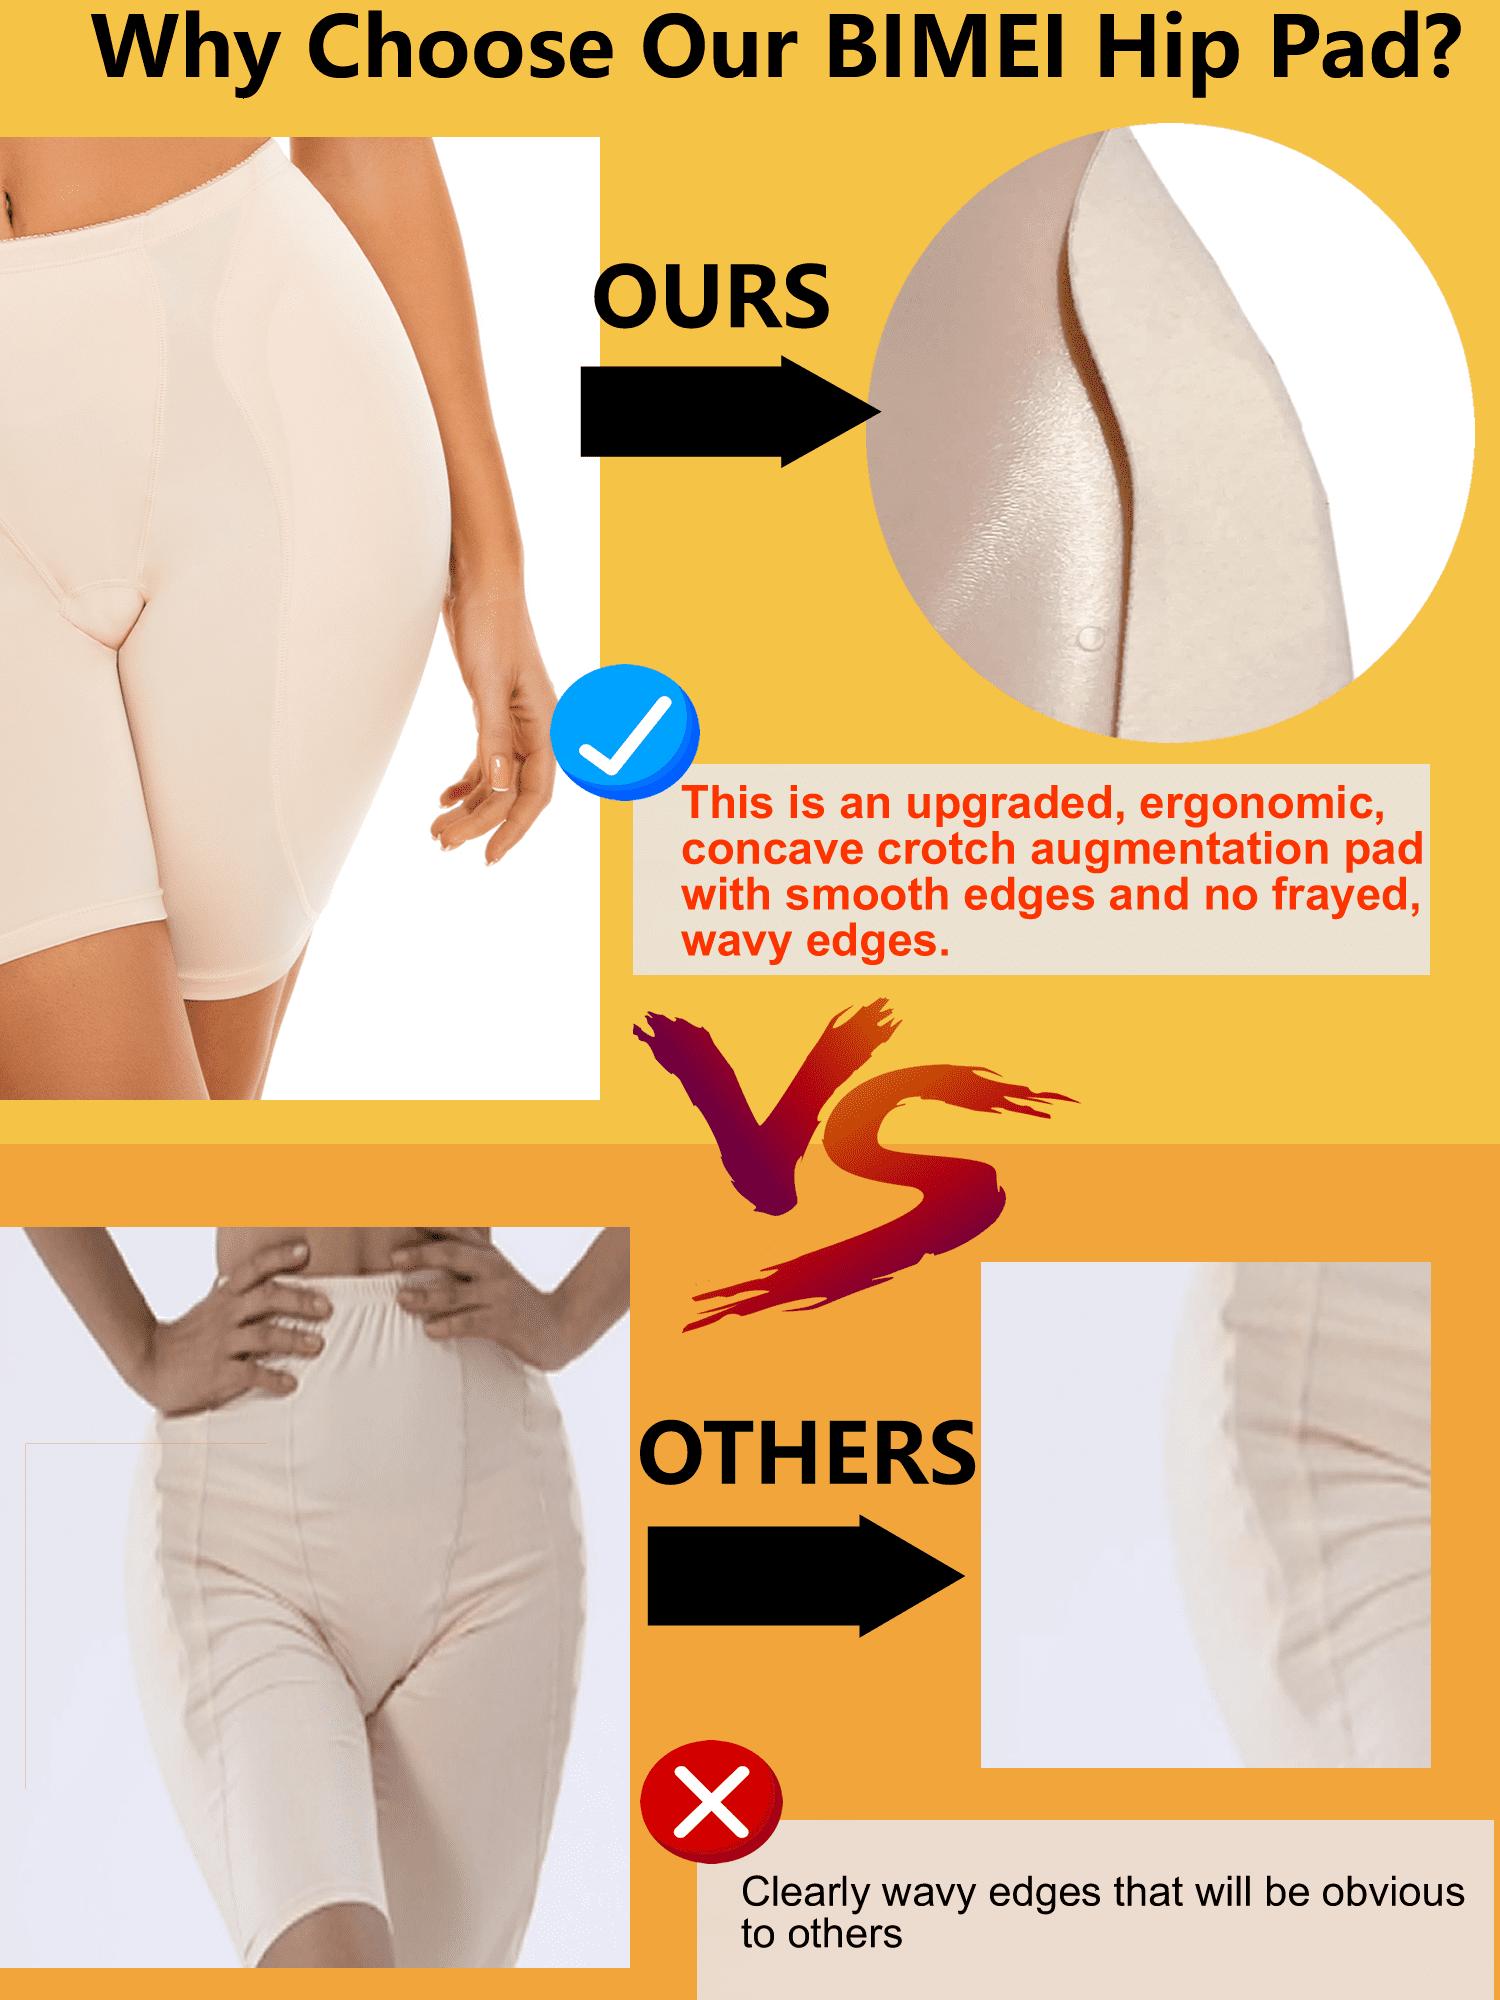 Rukuyi Shapewear for Women Tummy Control High Waist Butt Lifter Panty Body  Shaper HIPS Enhancer Thigh Slimmer(Beige,XXX-Large) : : Clothing,  Shoes & Accessories